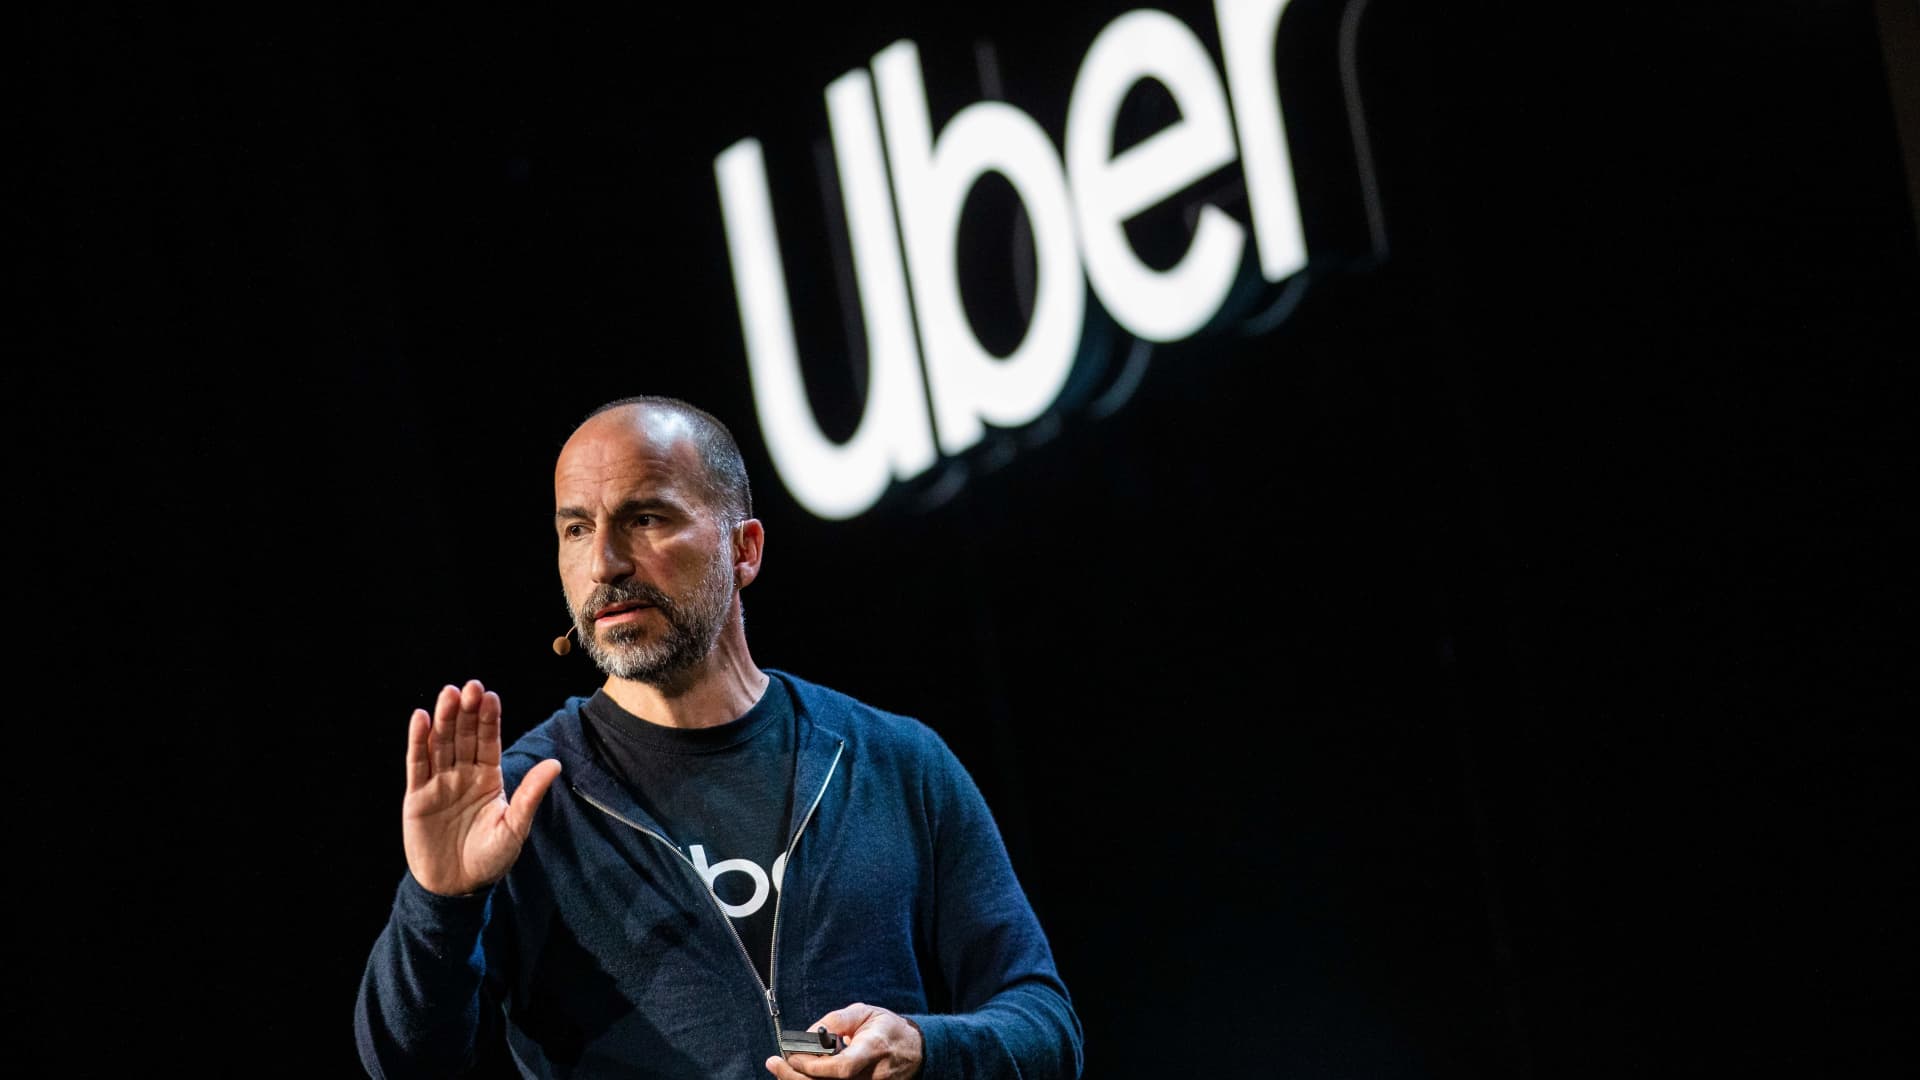 Uber joins the Dow Transports. Here’s why it’s a curious addition